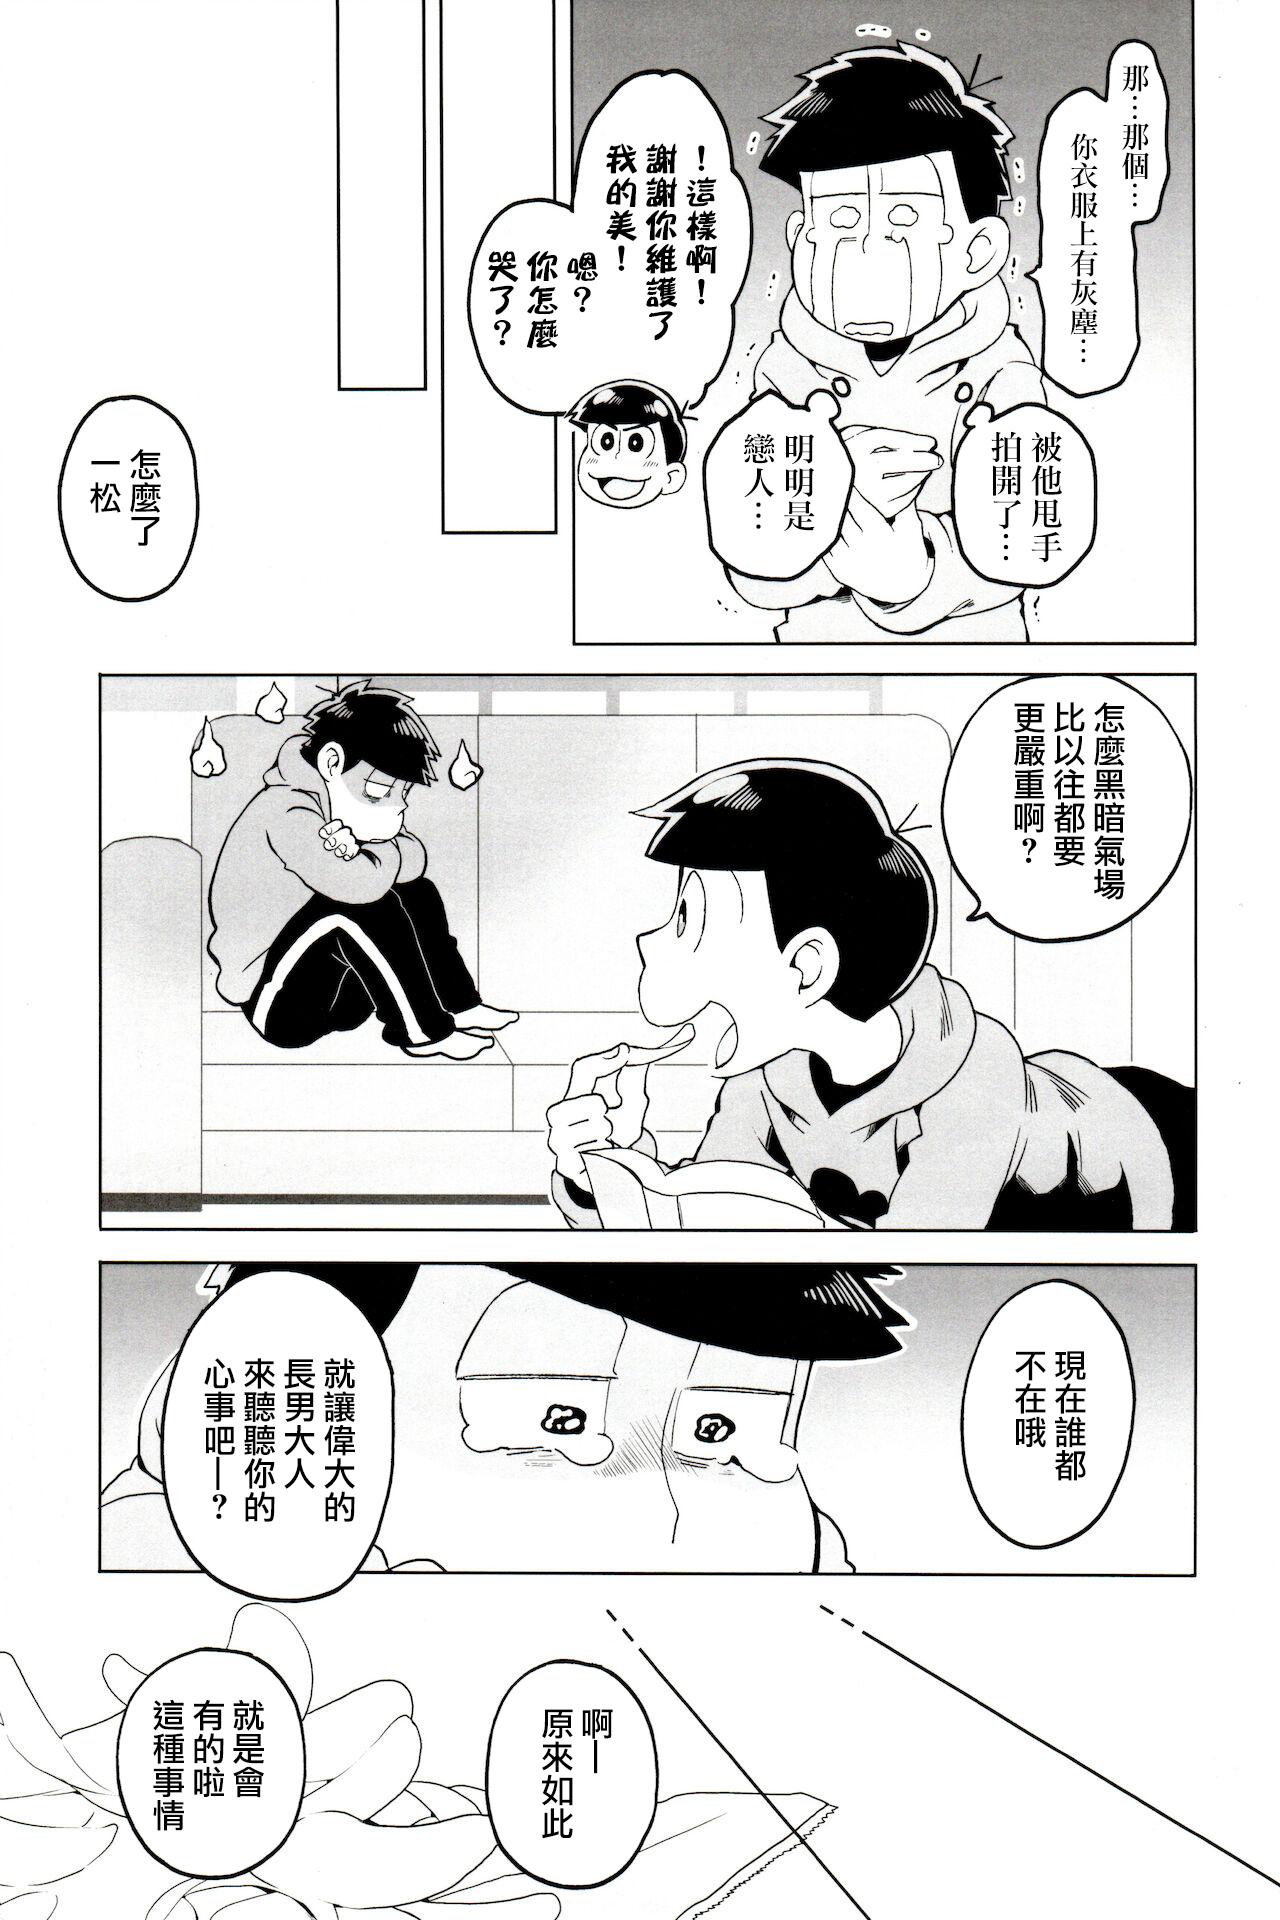 Pussy Fingering personal space - Osomatsu san Big - Page 9